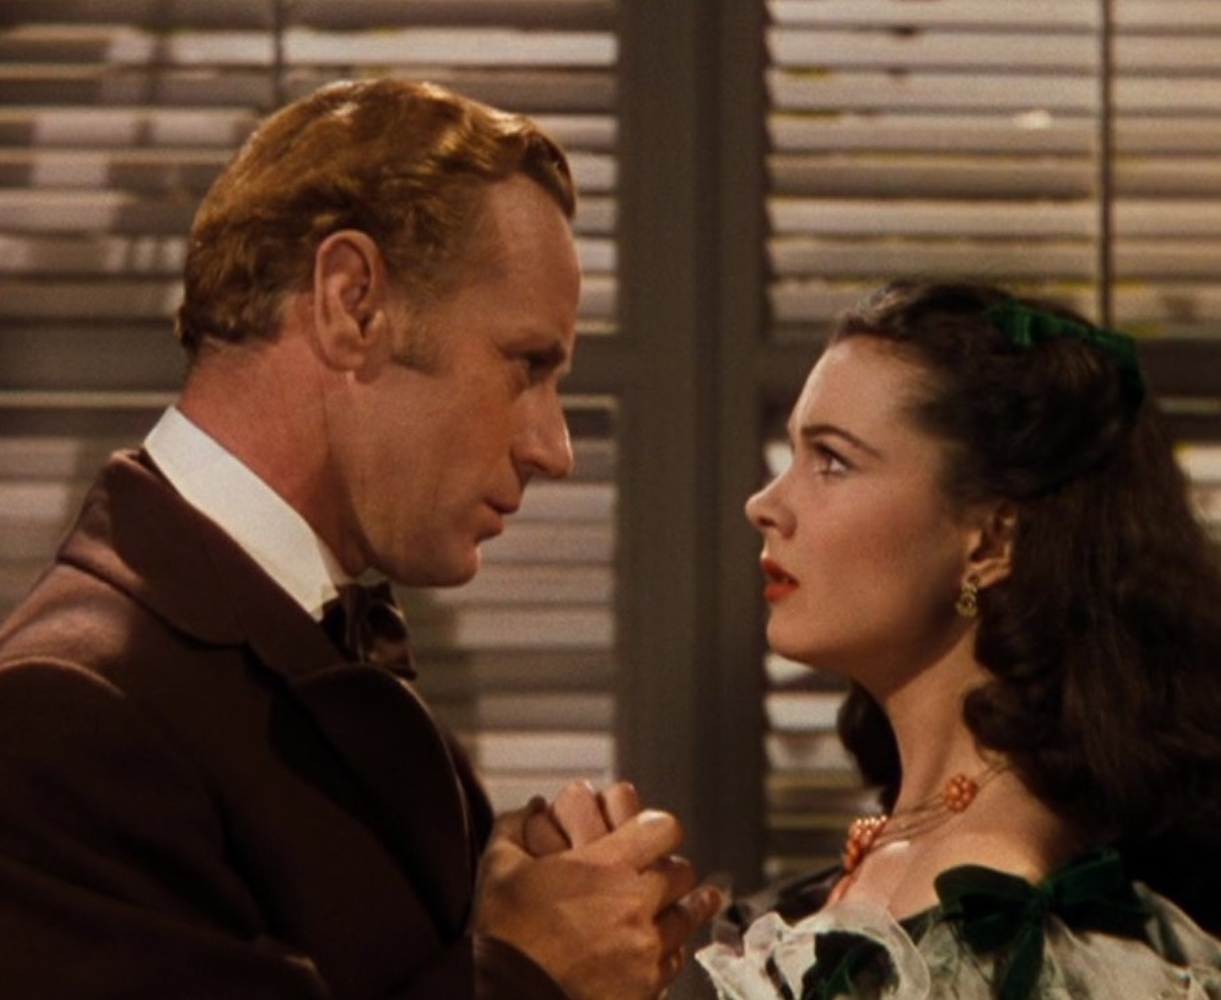 A Vivien Leigh coral necklace worn at the Twelve Oaks barbeque in Gone With the Wind - Image 5 of 5